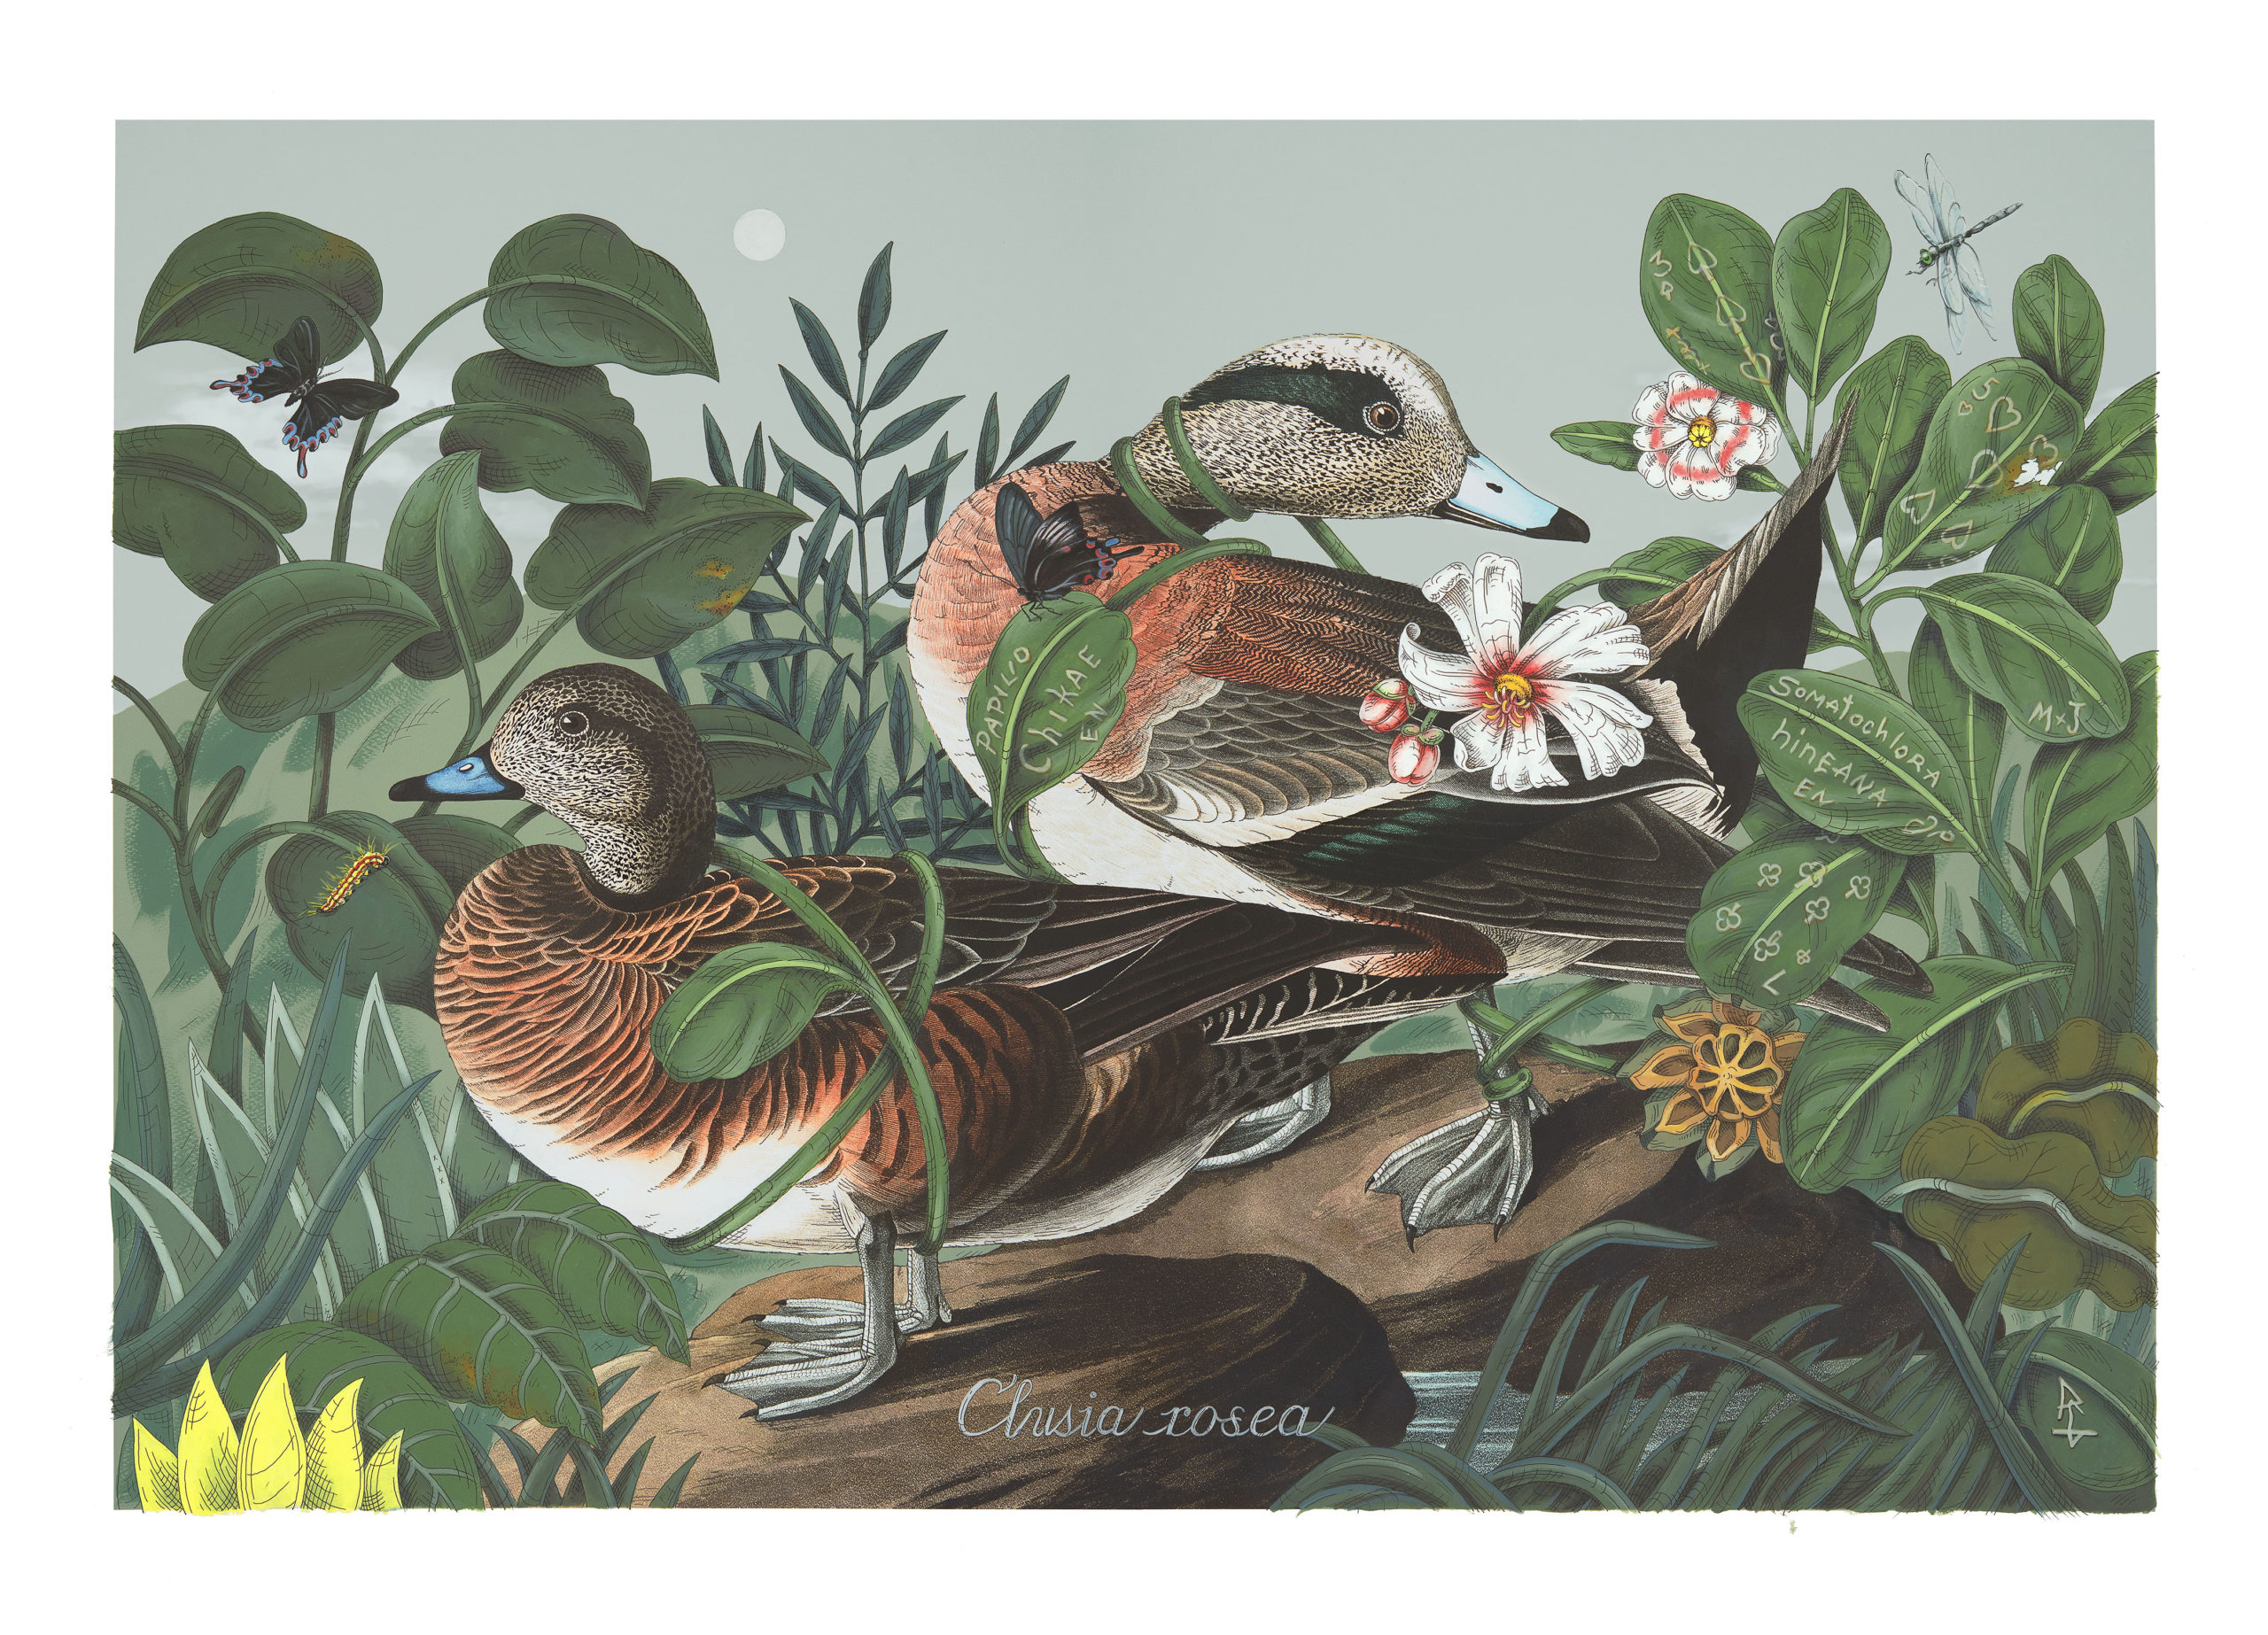 

											Penelope Gottlieb</b>

											<em>
												Still Lives  New work by Penelope Gottlieb</em> 

											<h4>
												July 29 - September 23, 2022											</h4>

		                																																													<i>Clusia rosea,</i>  
																																																					acrylic and ink over a digital reproduction of an Audubon print, 
																																								26 x 38 inches 
																								
		                				